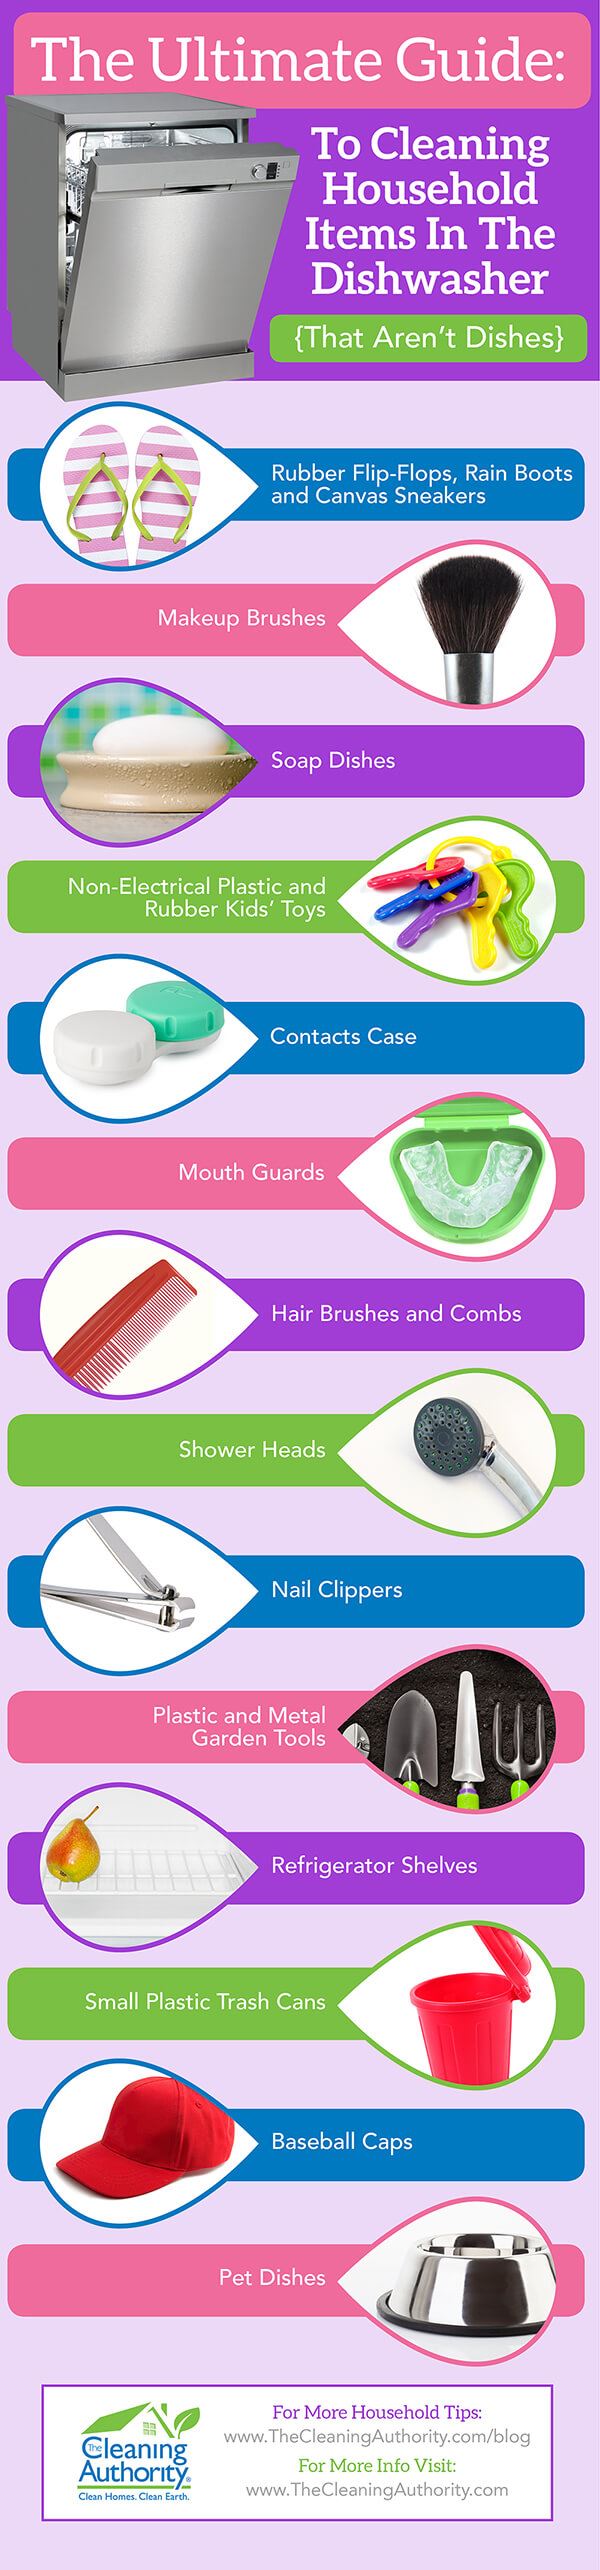 guide to cleaning household items